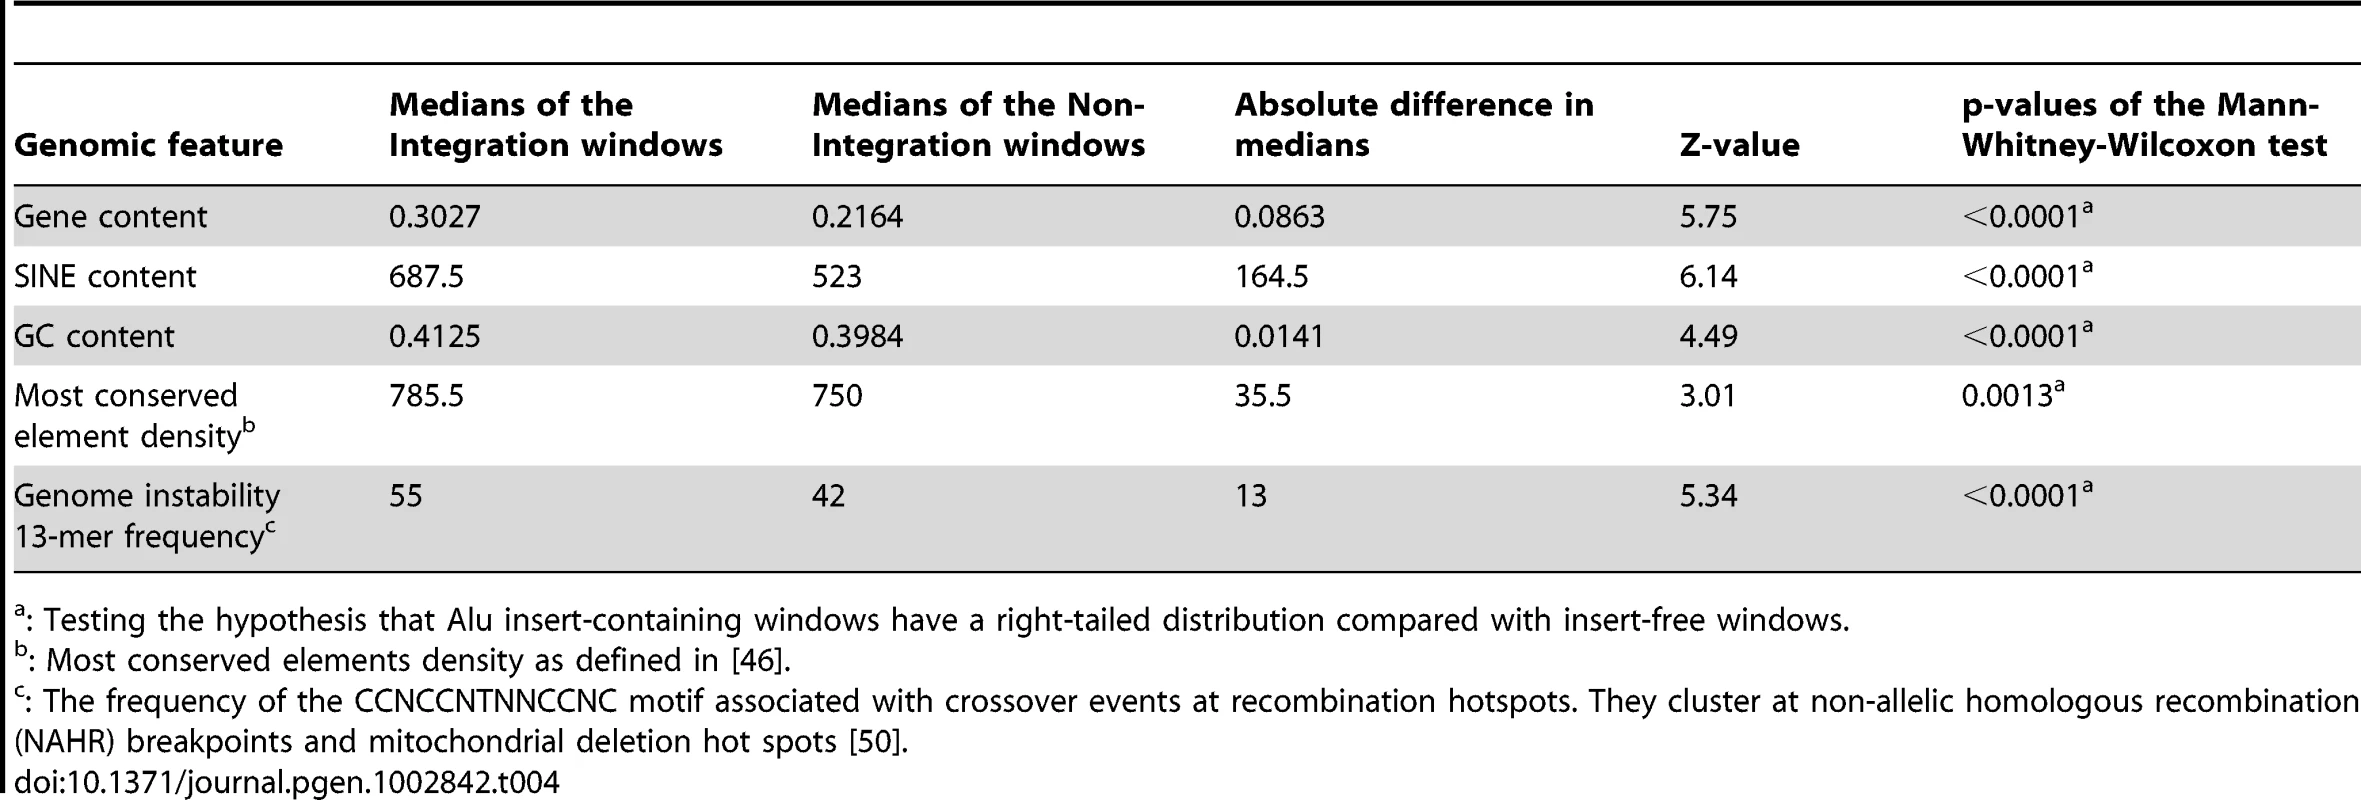 Genomic features with significant differences in their distributions between Alu insert-containing versus insert-free windows.